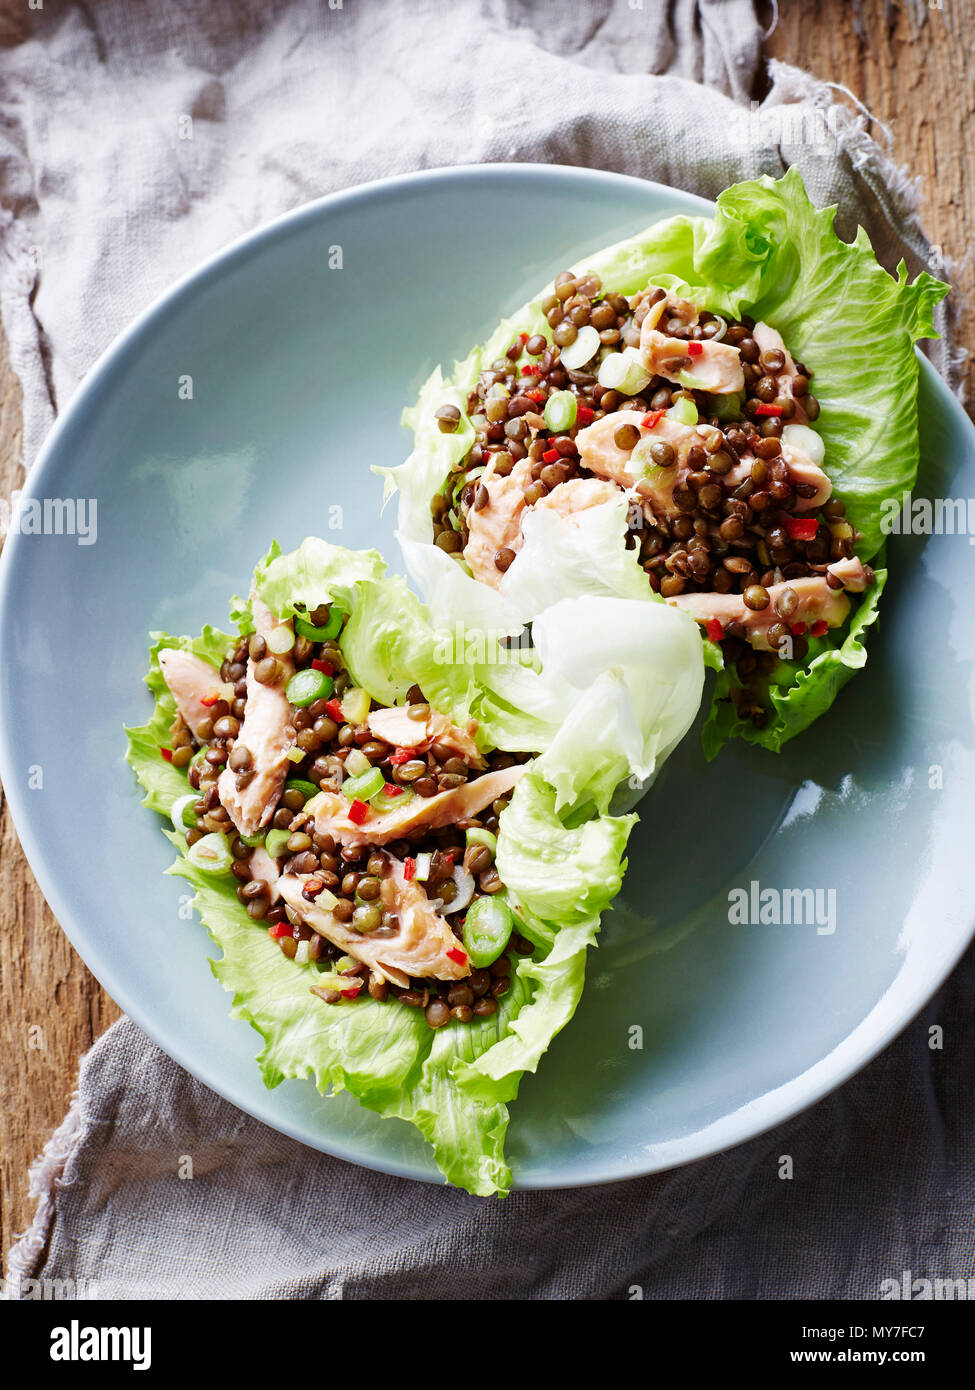 Smoked trout and lentil lettuce cups, on plate, close-up Stock Photo